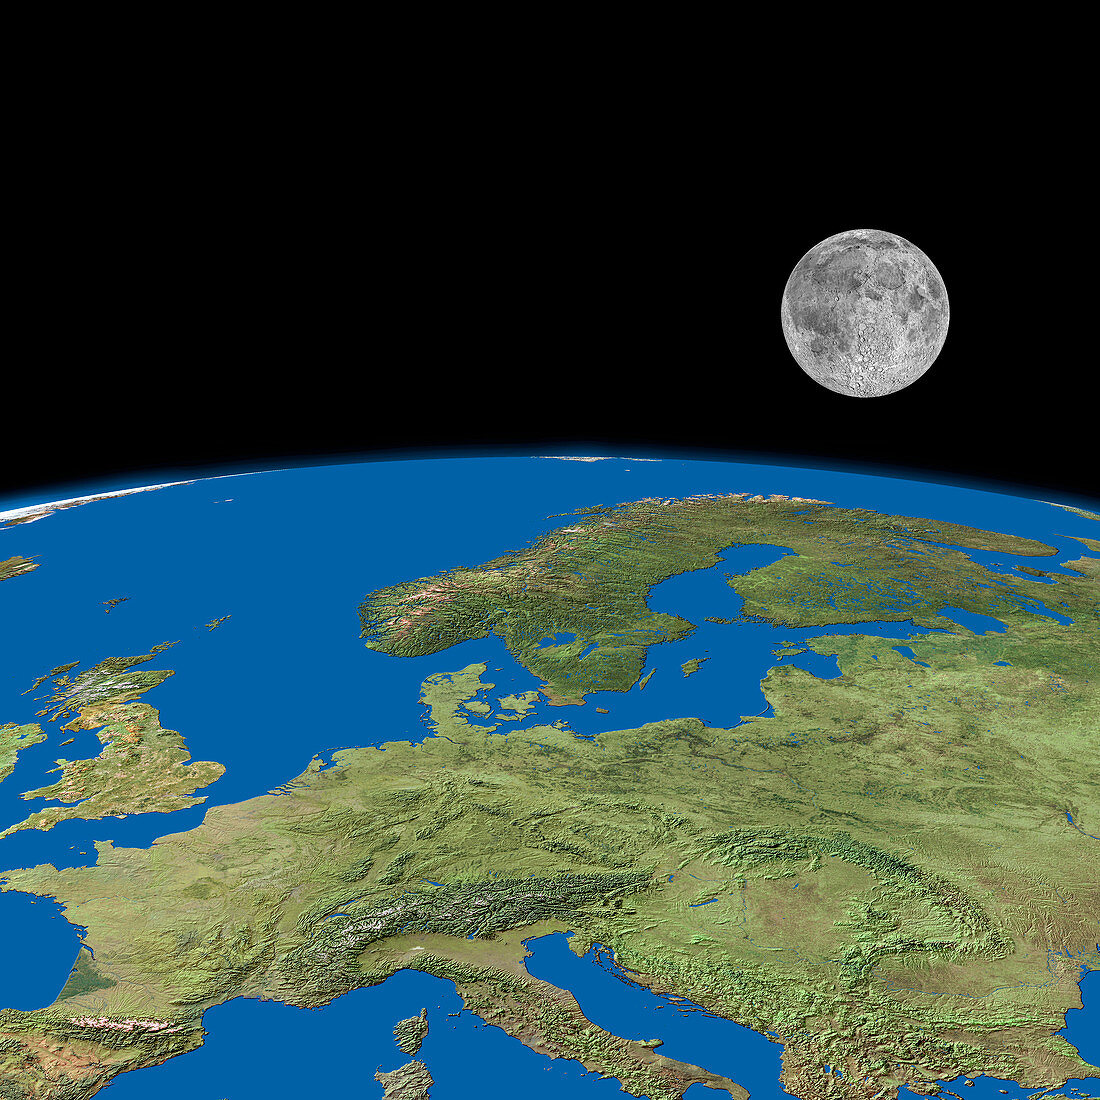 Europe and the Moon